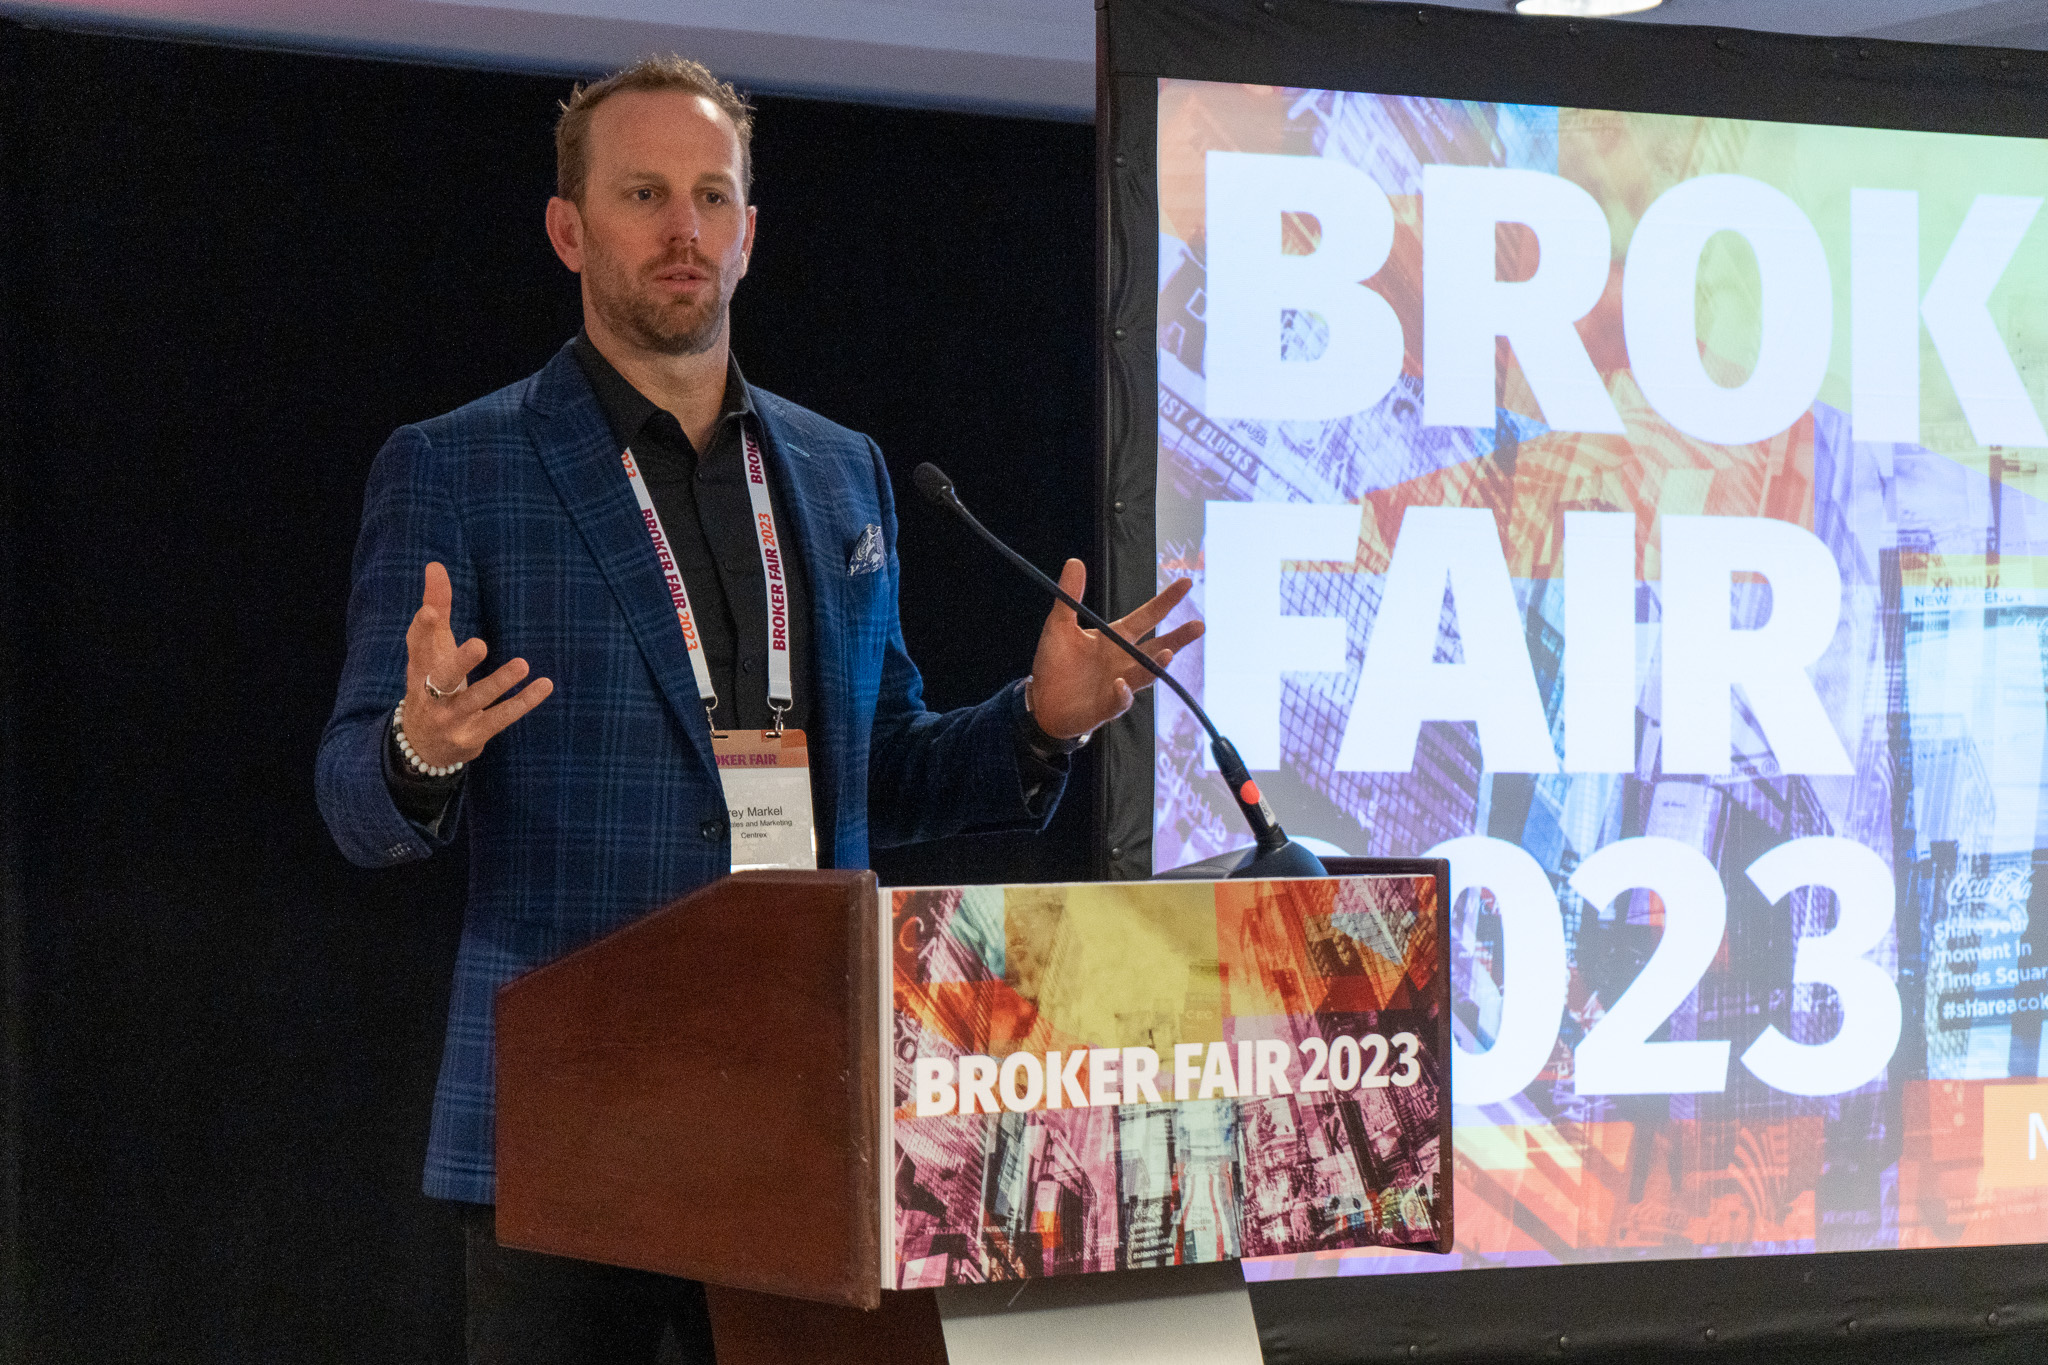 Broker Fair Conference 2023: Charting the Future of Alternative Business Finance